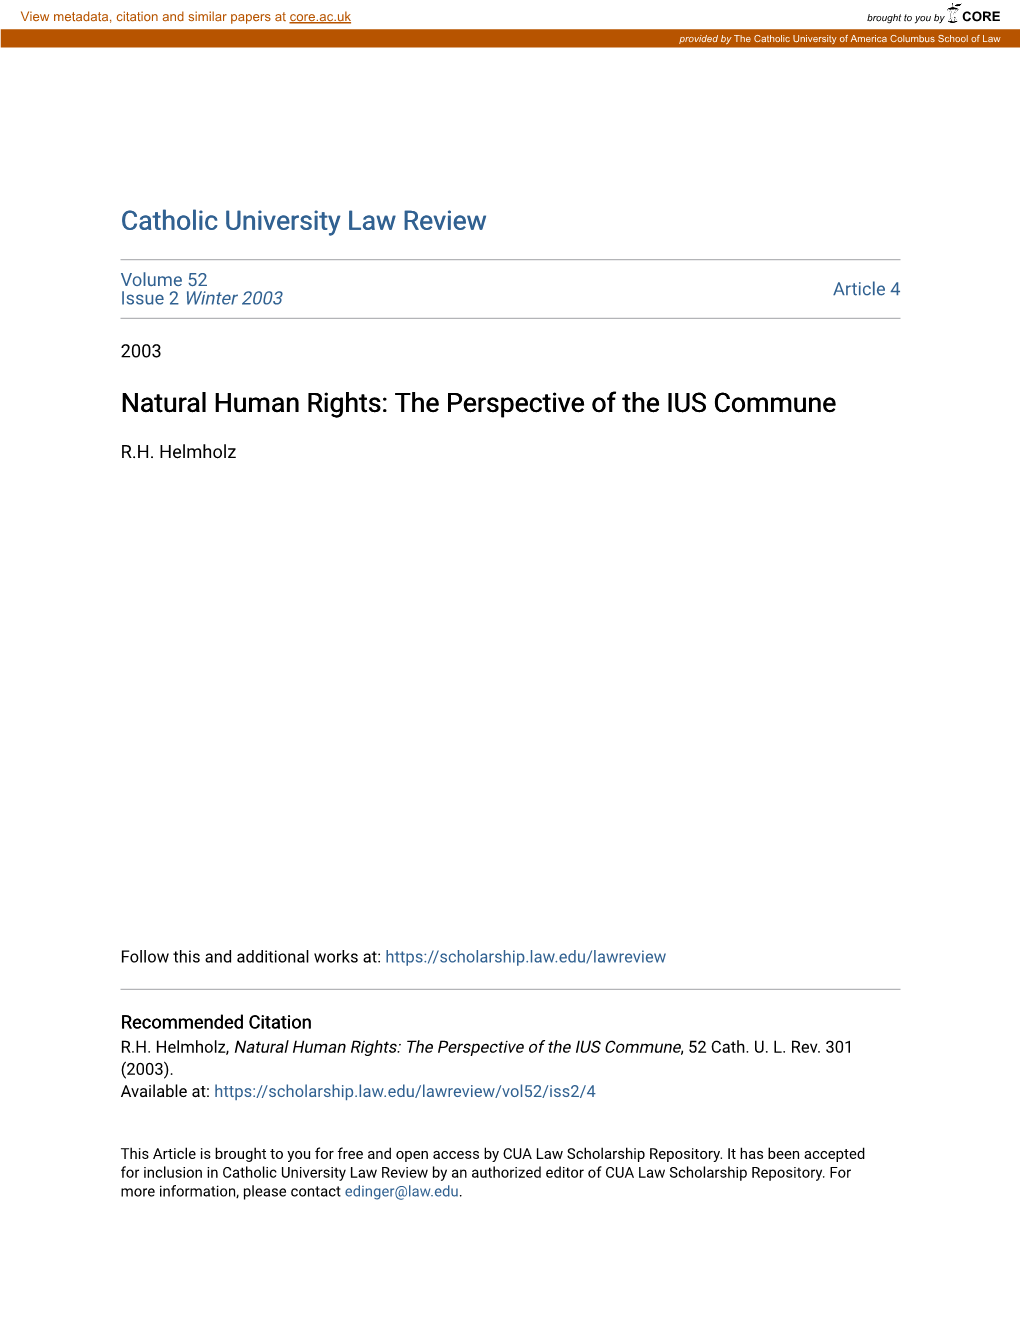 Natural Human Rights: the Perspective of the IUS Commune